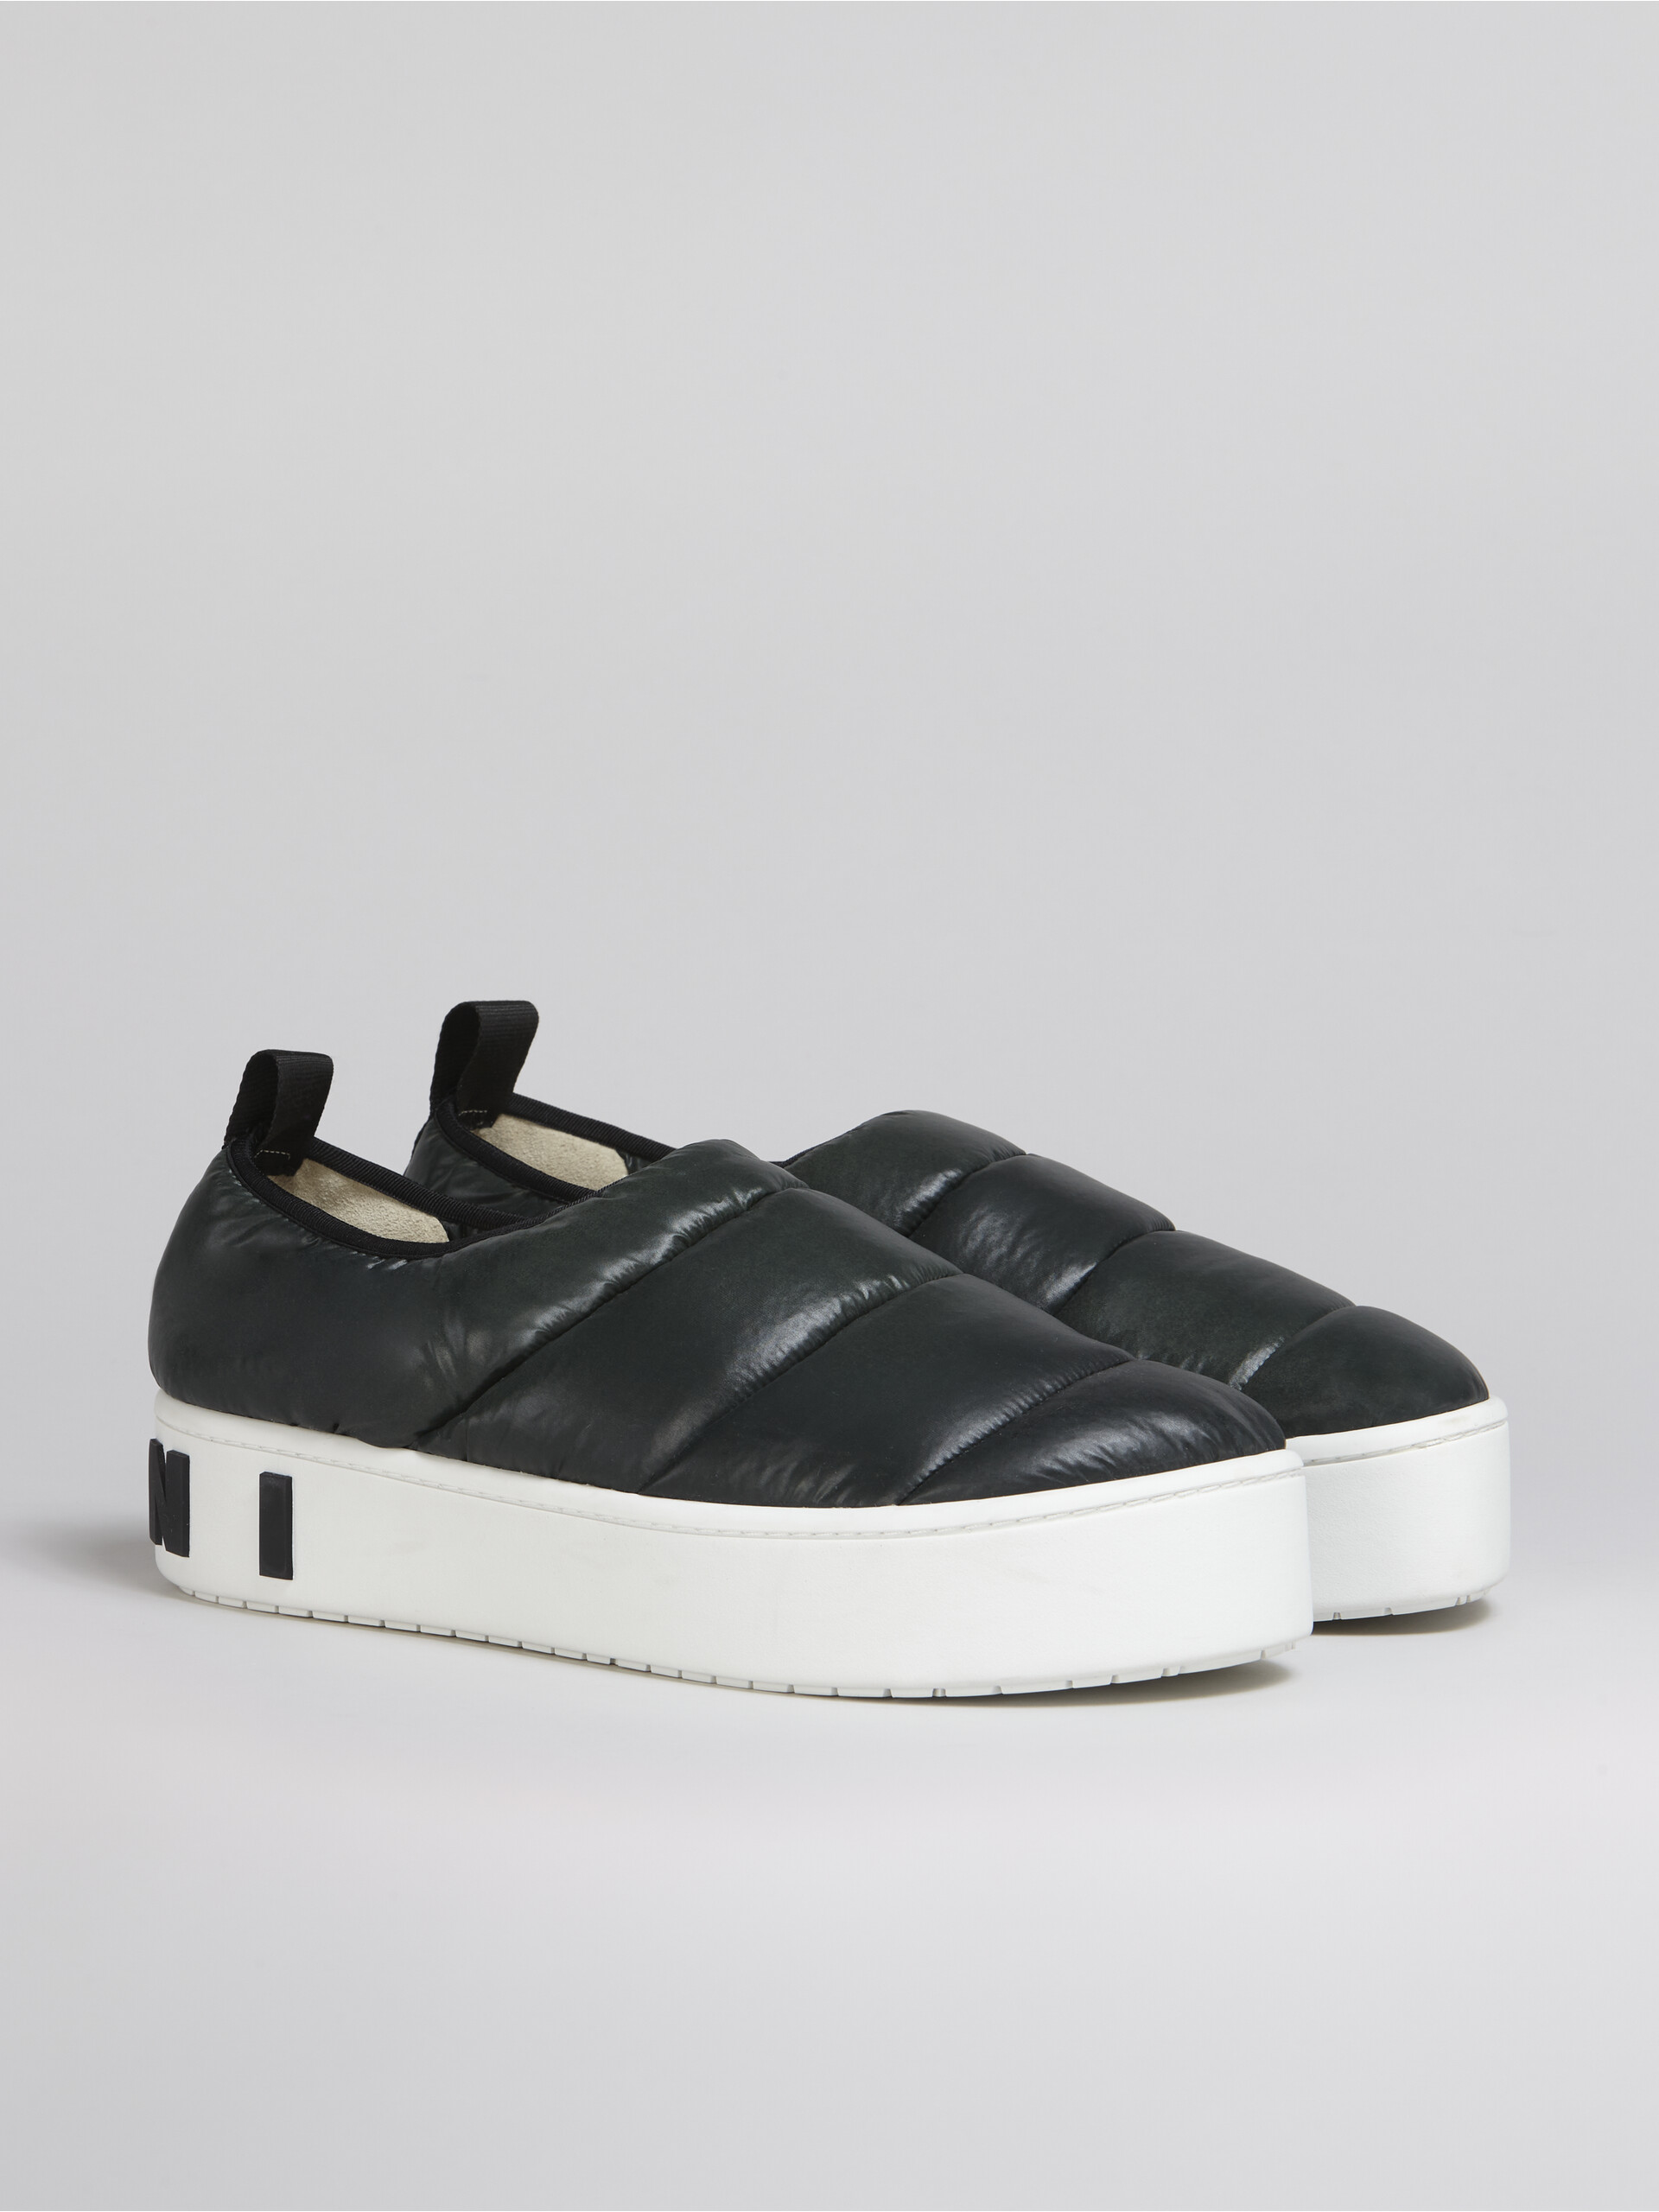 PAW slip-on sneaker in quilted nylon - Sneakers - Image 2